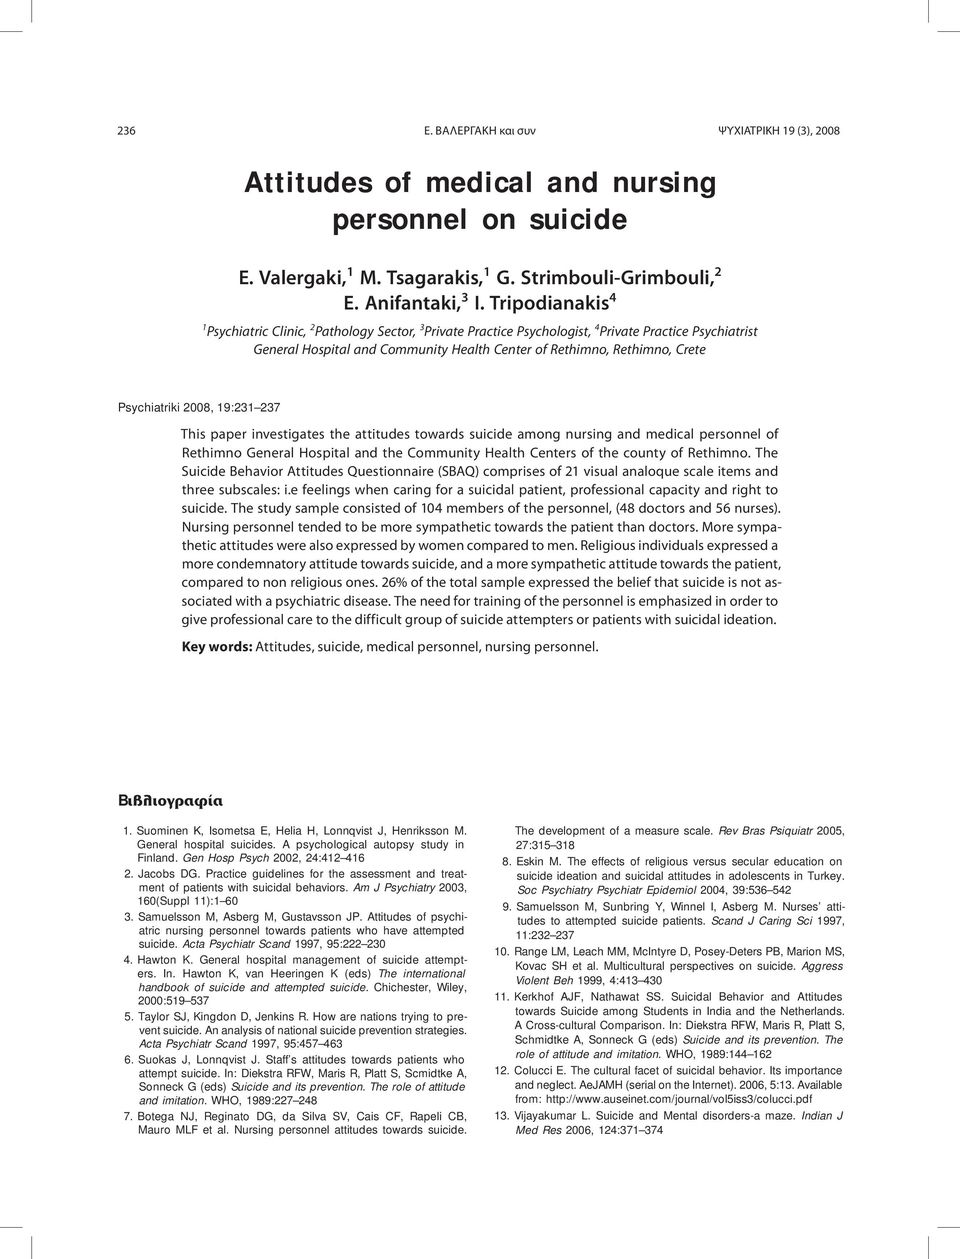 Psychiatriki 2008, 19:231 237 This paper investigates the attitudes towards suicide among nursing and medical personnel of Rethimno General Hospital and the Community Health Centers of the county of